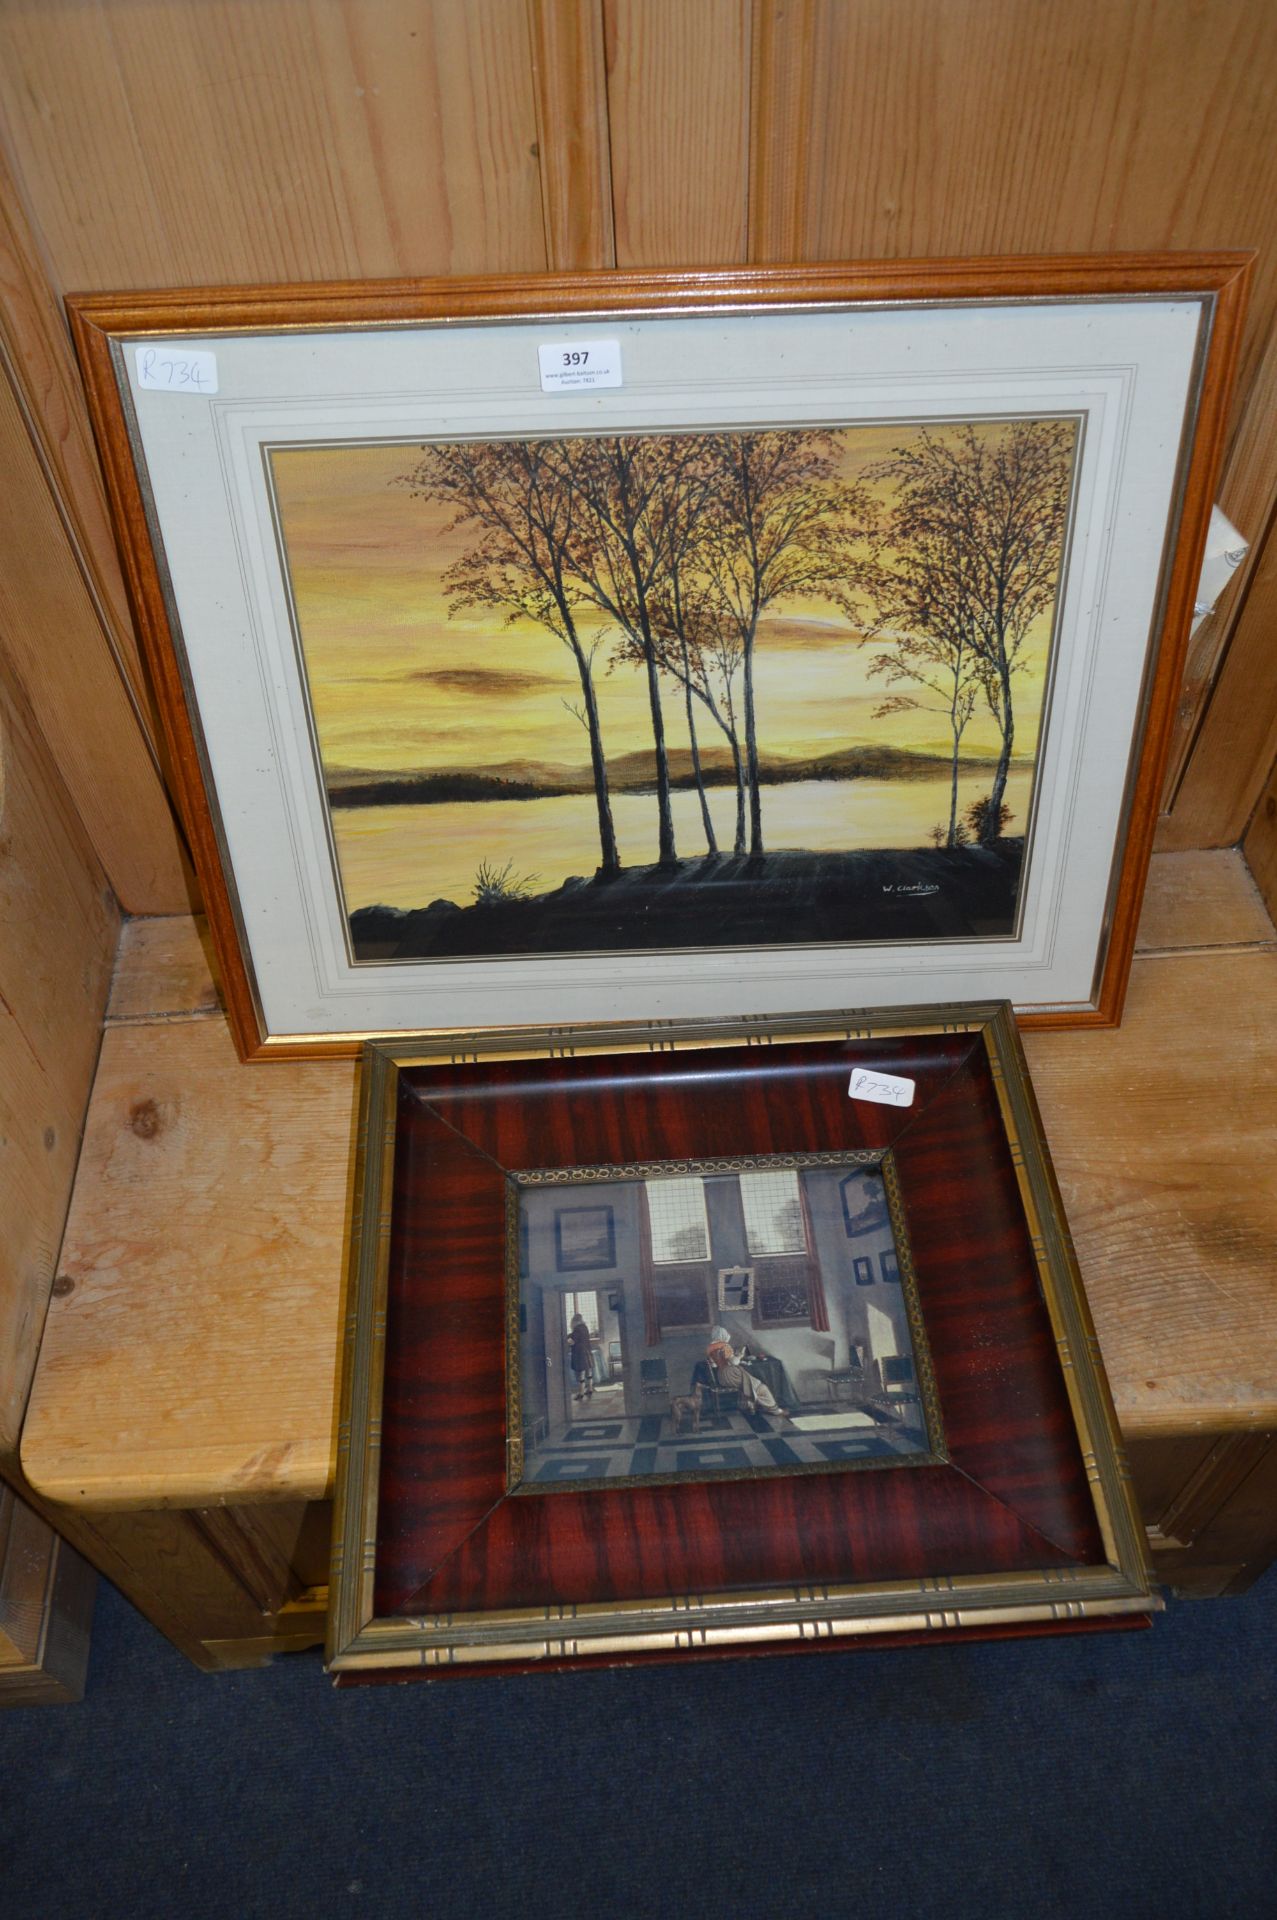 Framed Painting "Country Scene" and a Framed Print